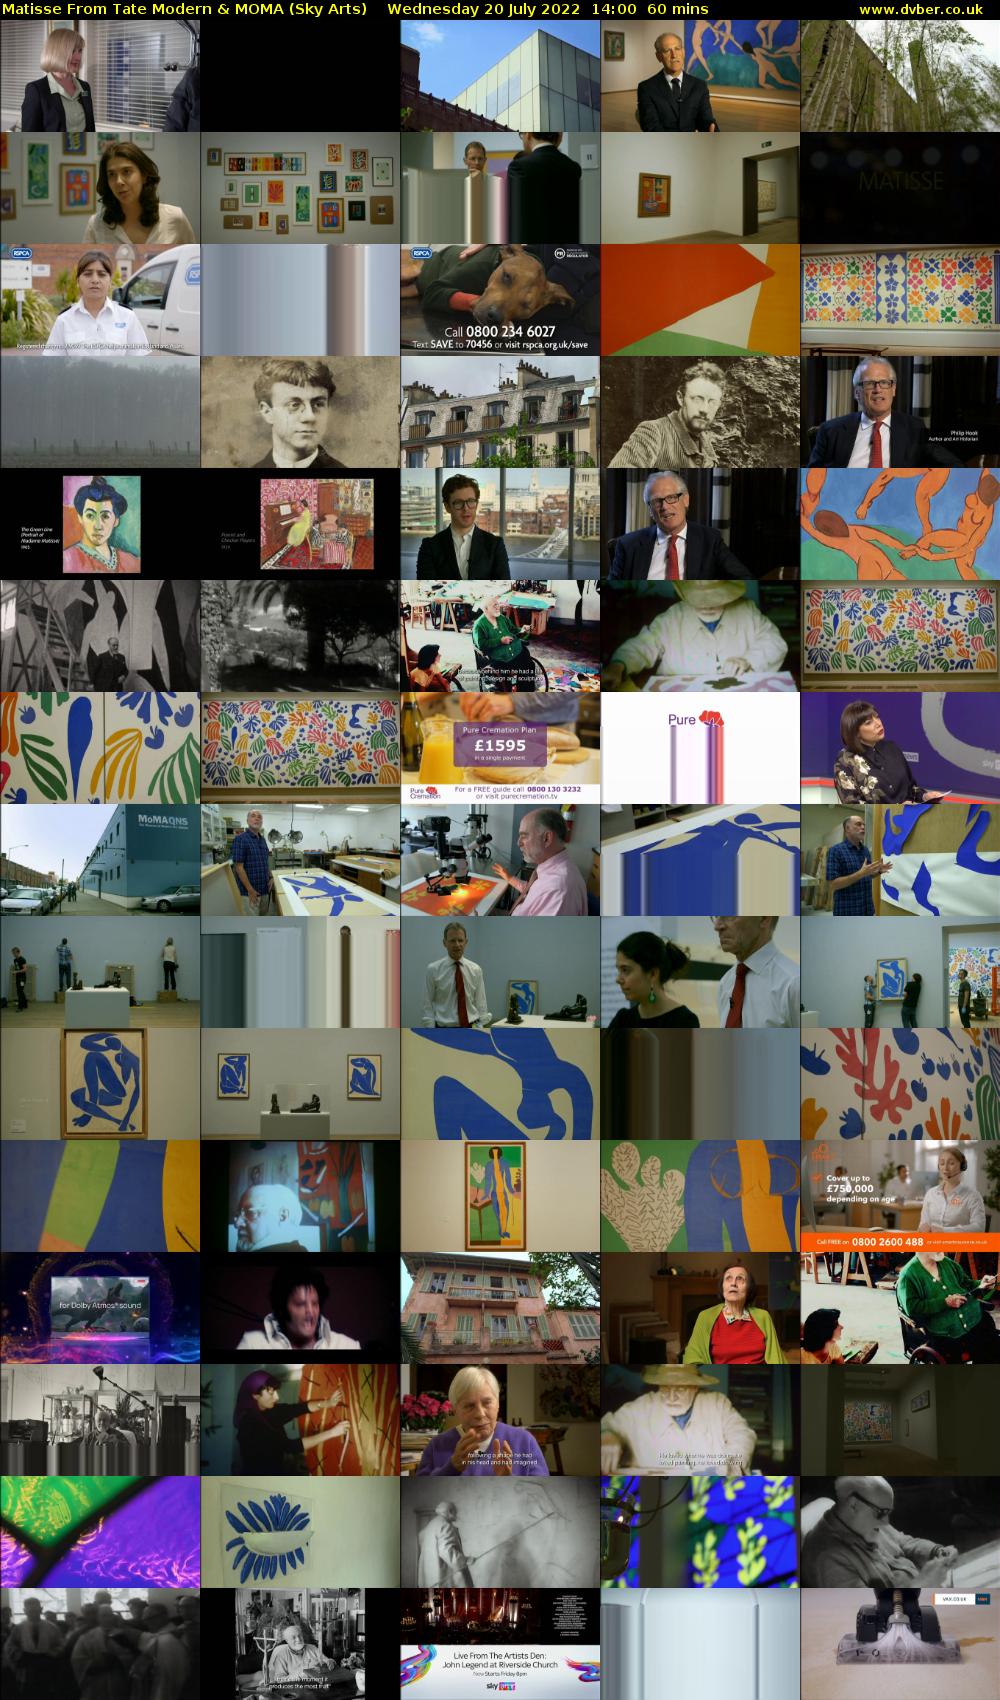 Matisse From Tate Modern & MoMa (Sky Arts) Wednesday 20 July 2022 14:00 - 15:00